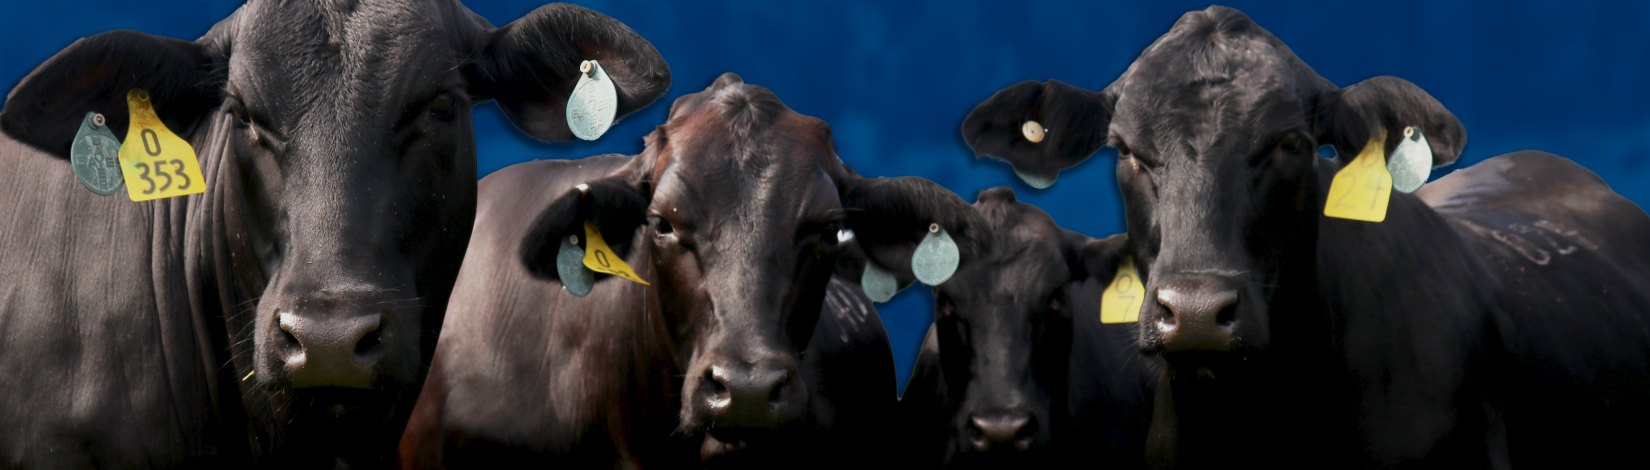 Several beef cows standing in a row in a pasture with blue background